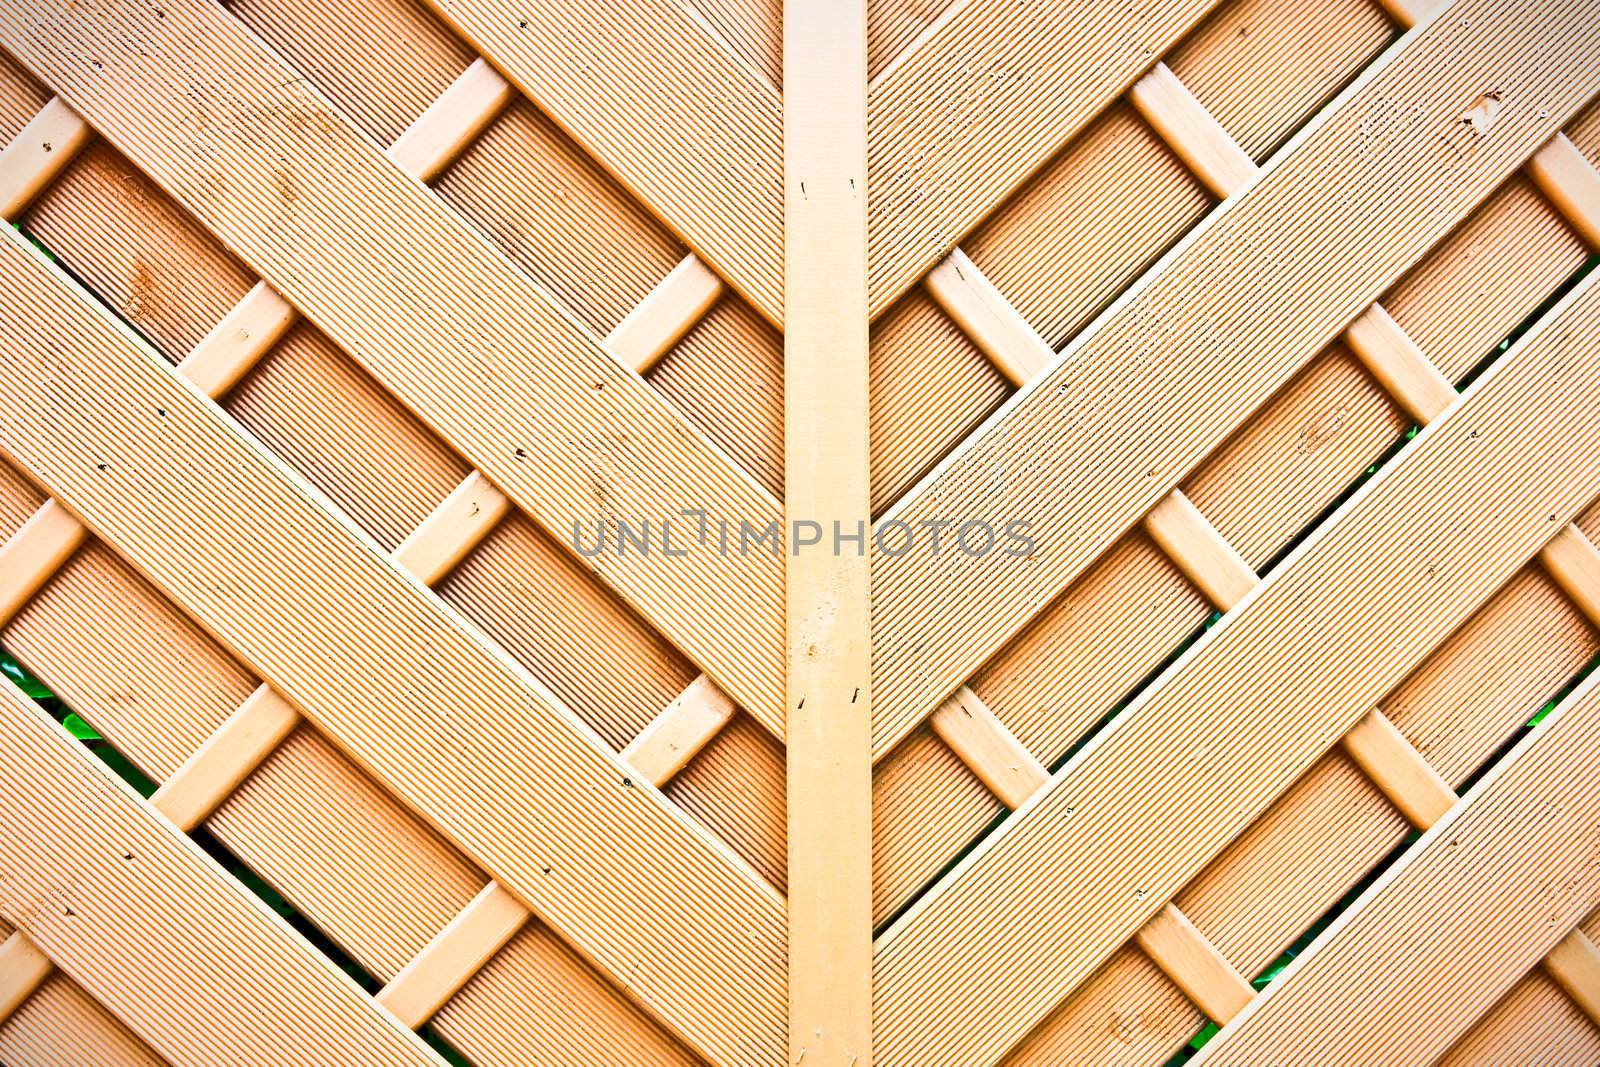 A nice detailed background image of a wooden fence